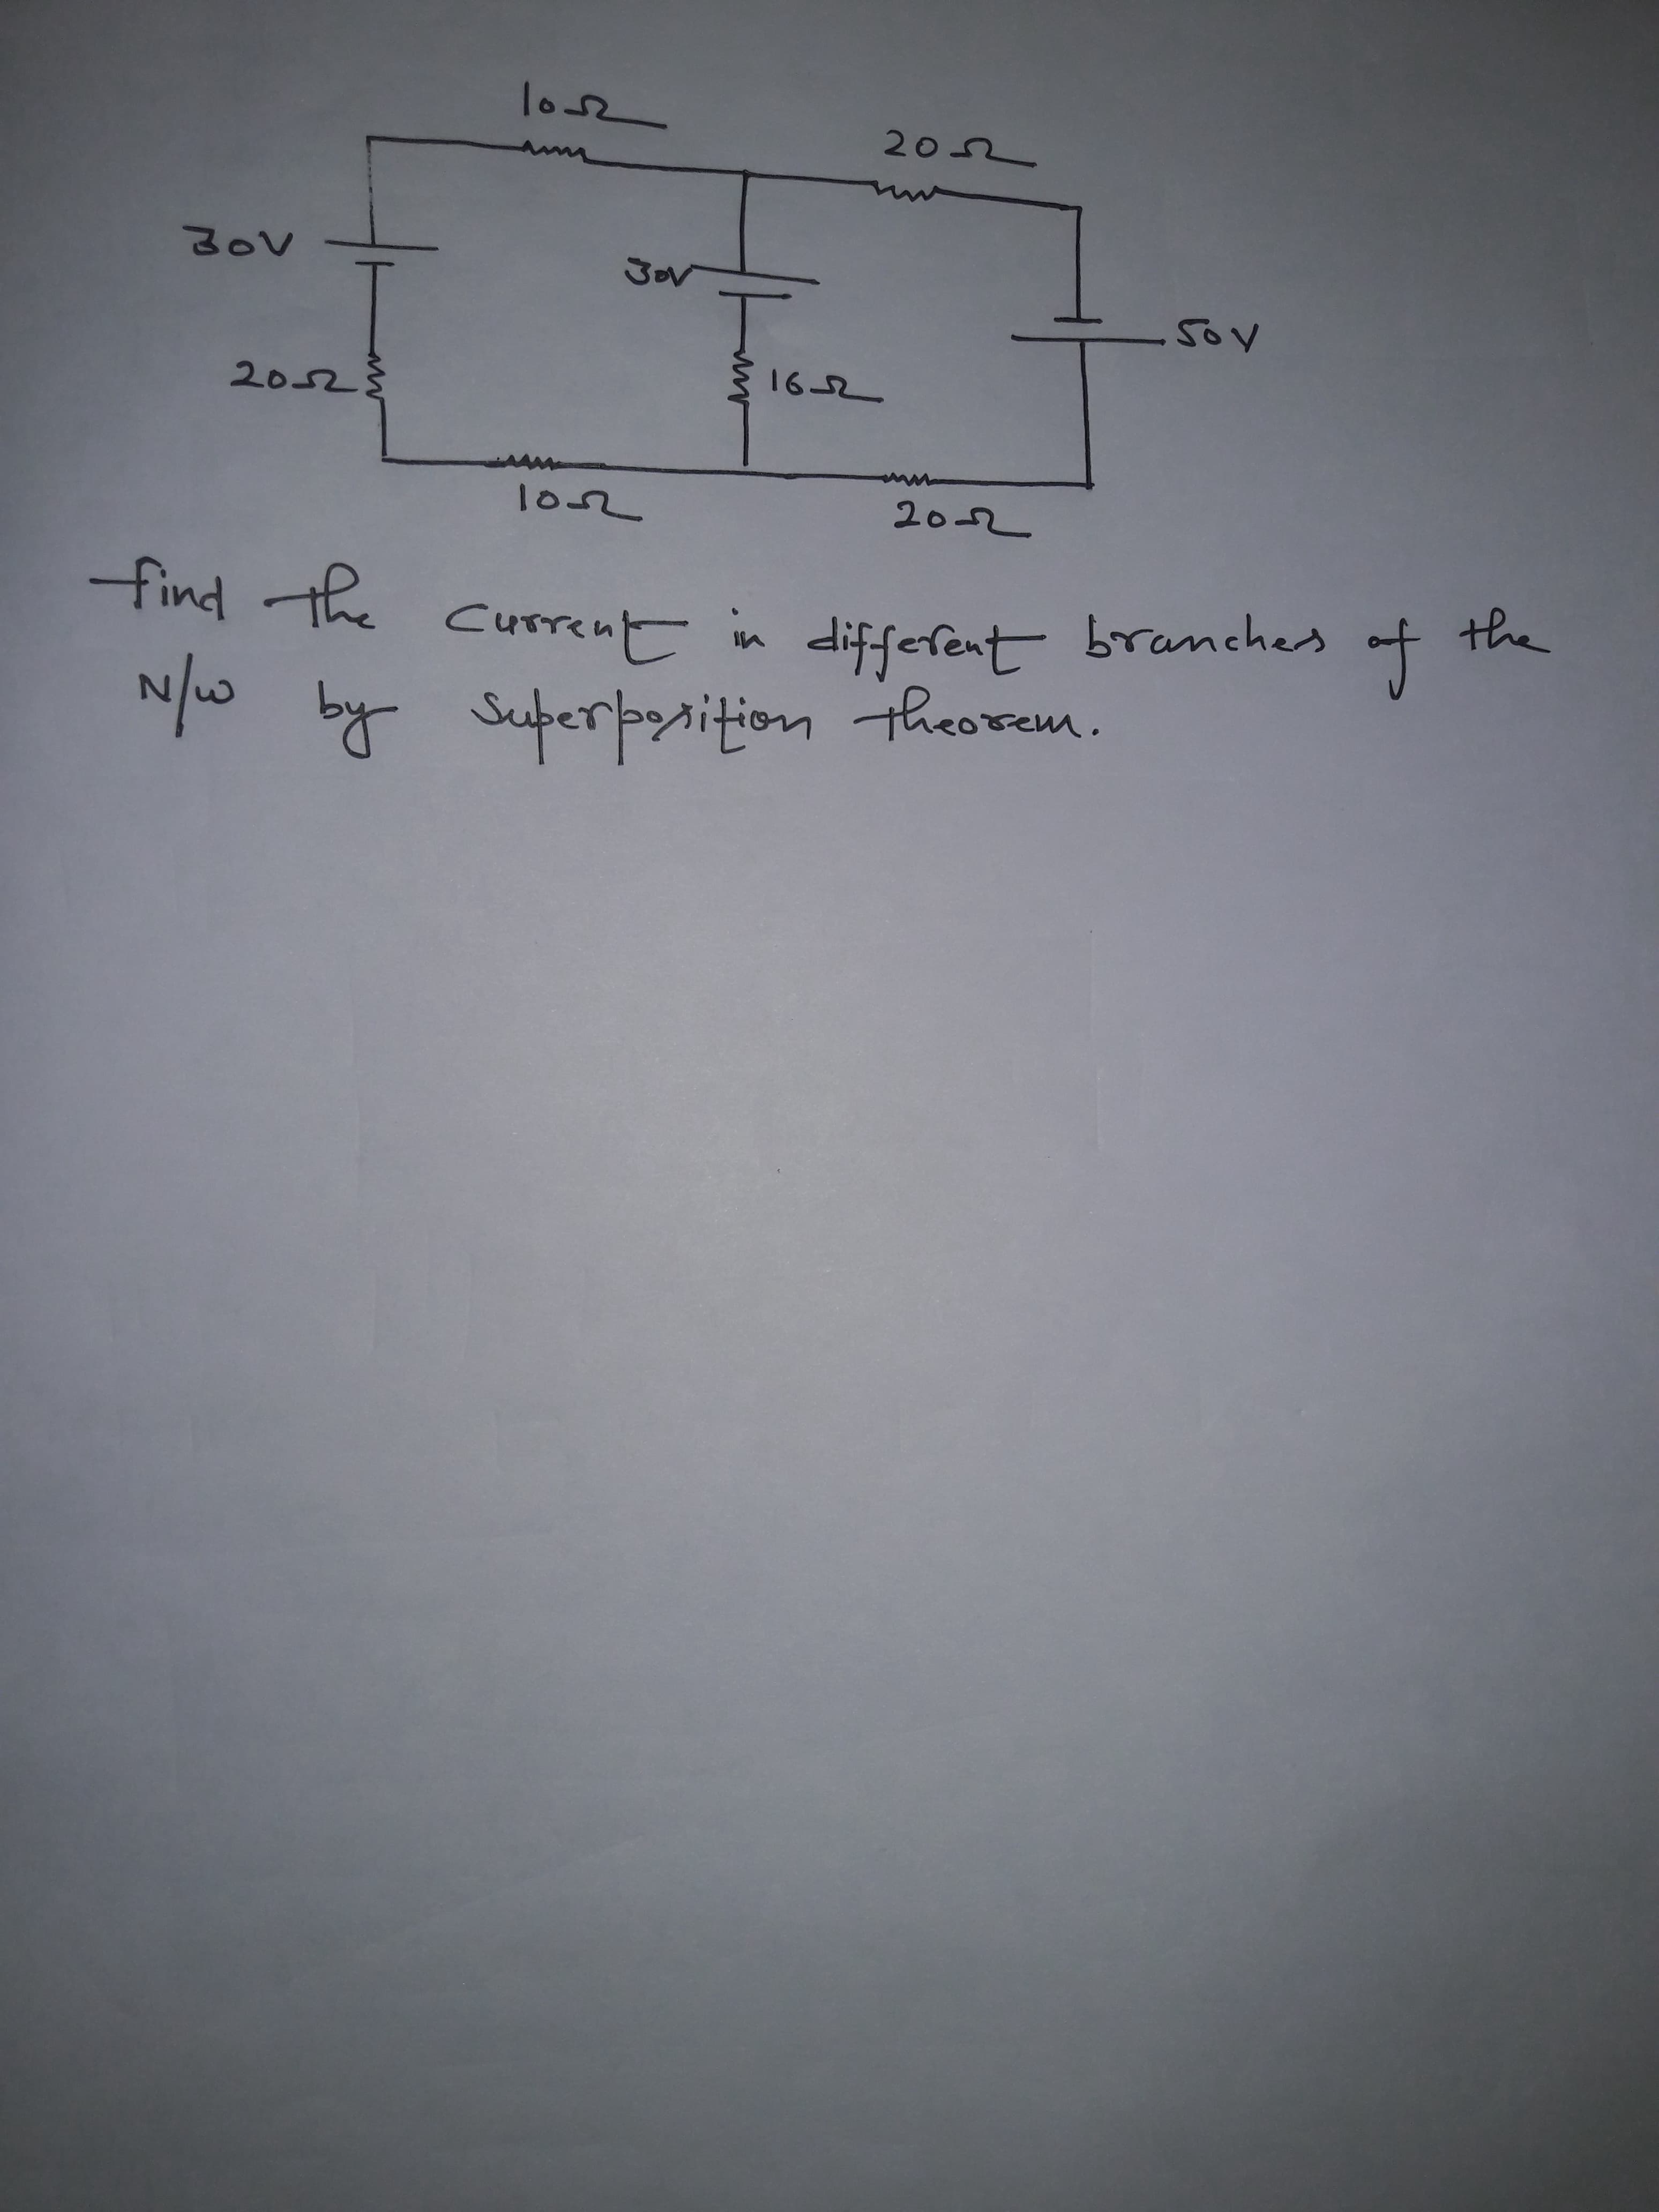 tind the curren in branches
the
diffefent
N/w by Superrition theorem.
